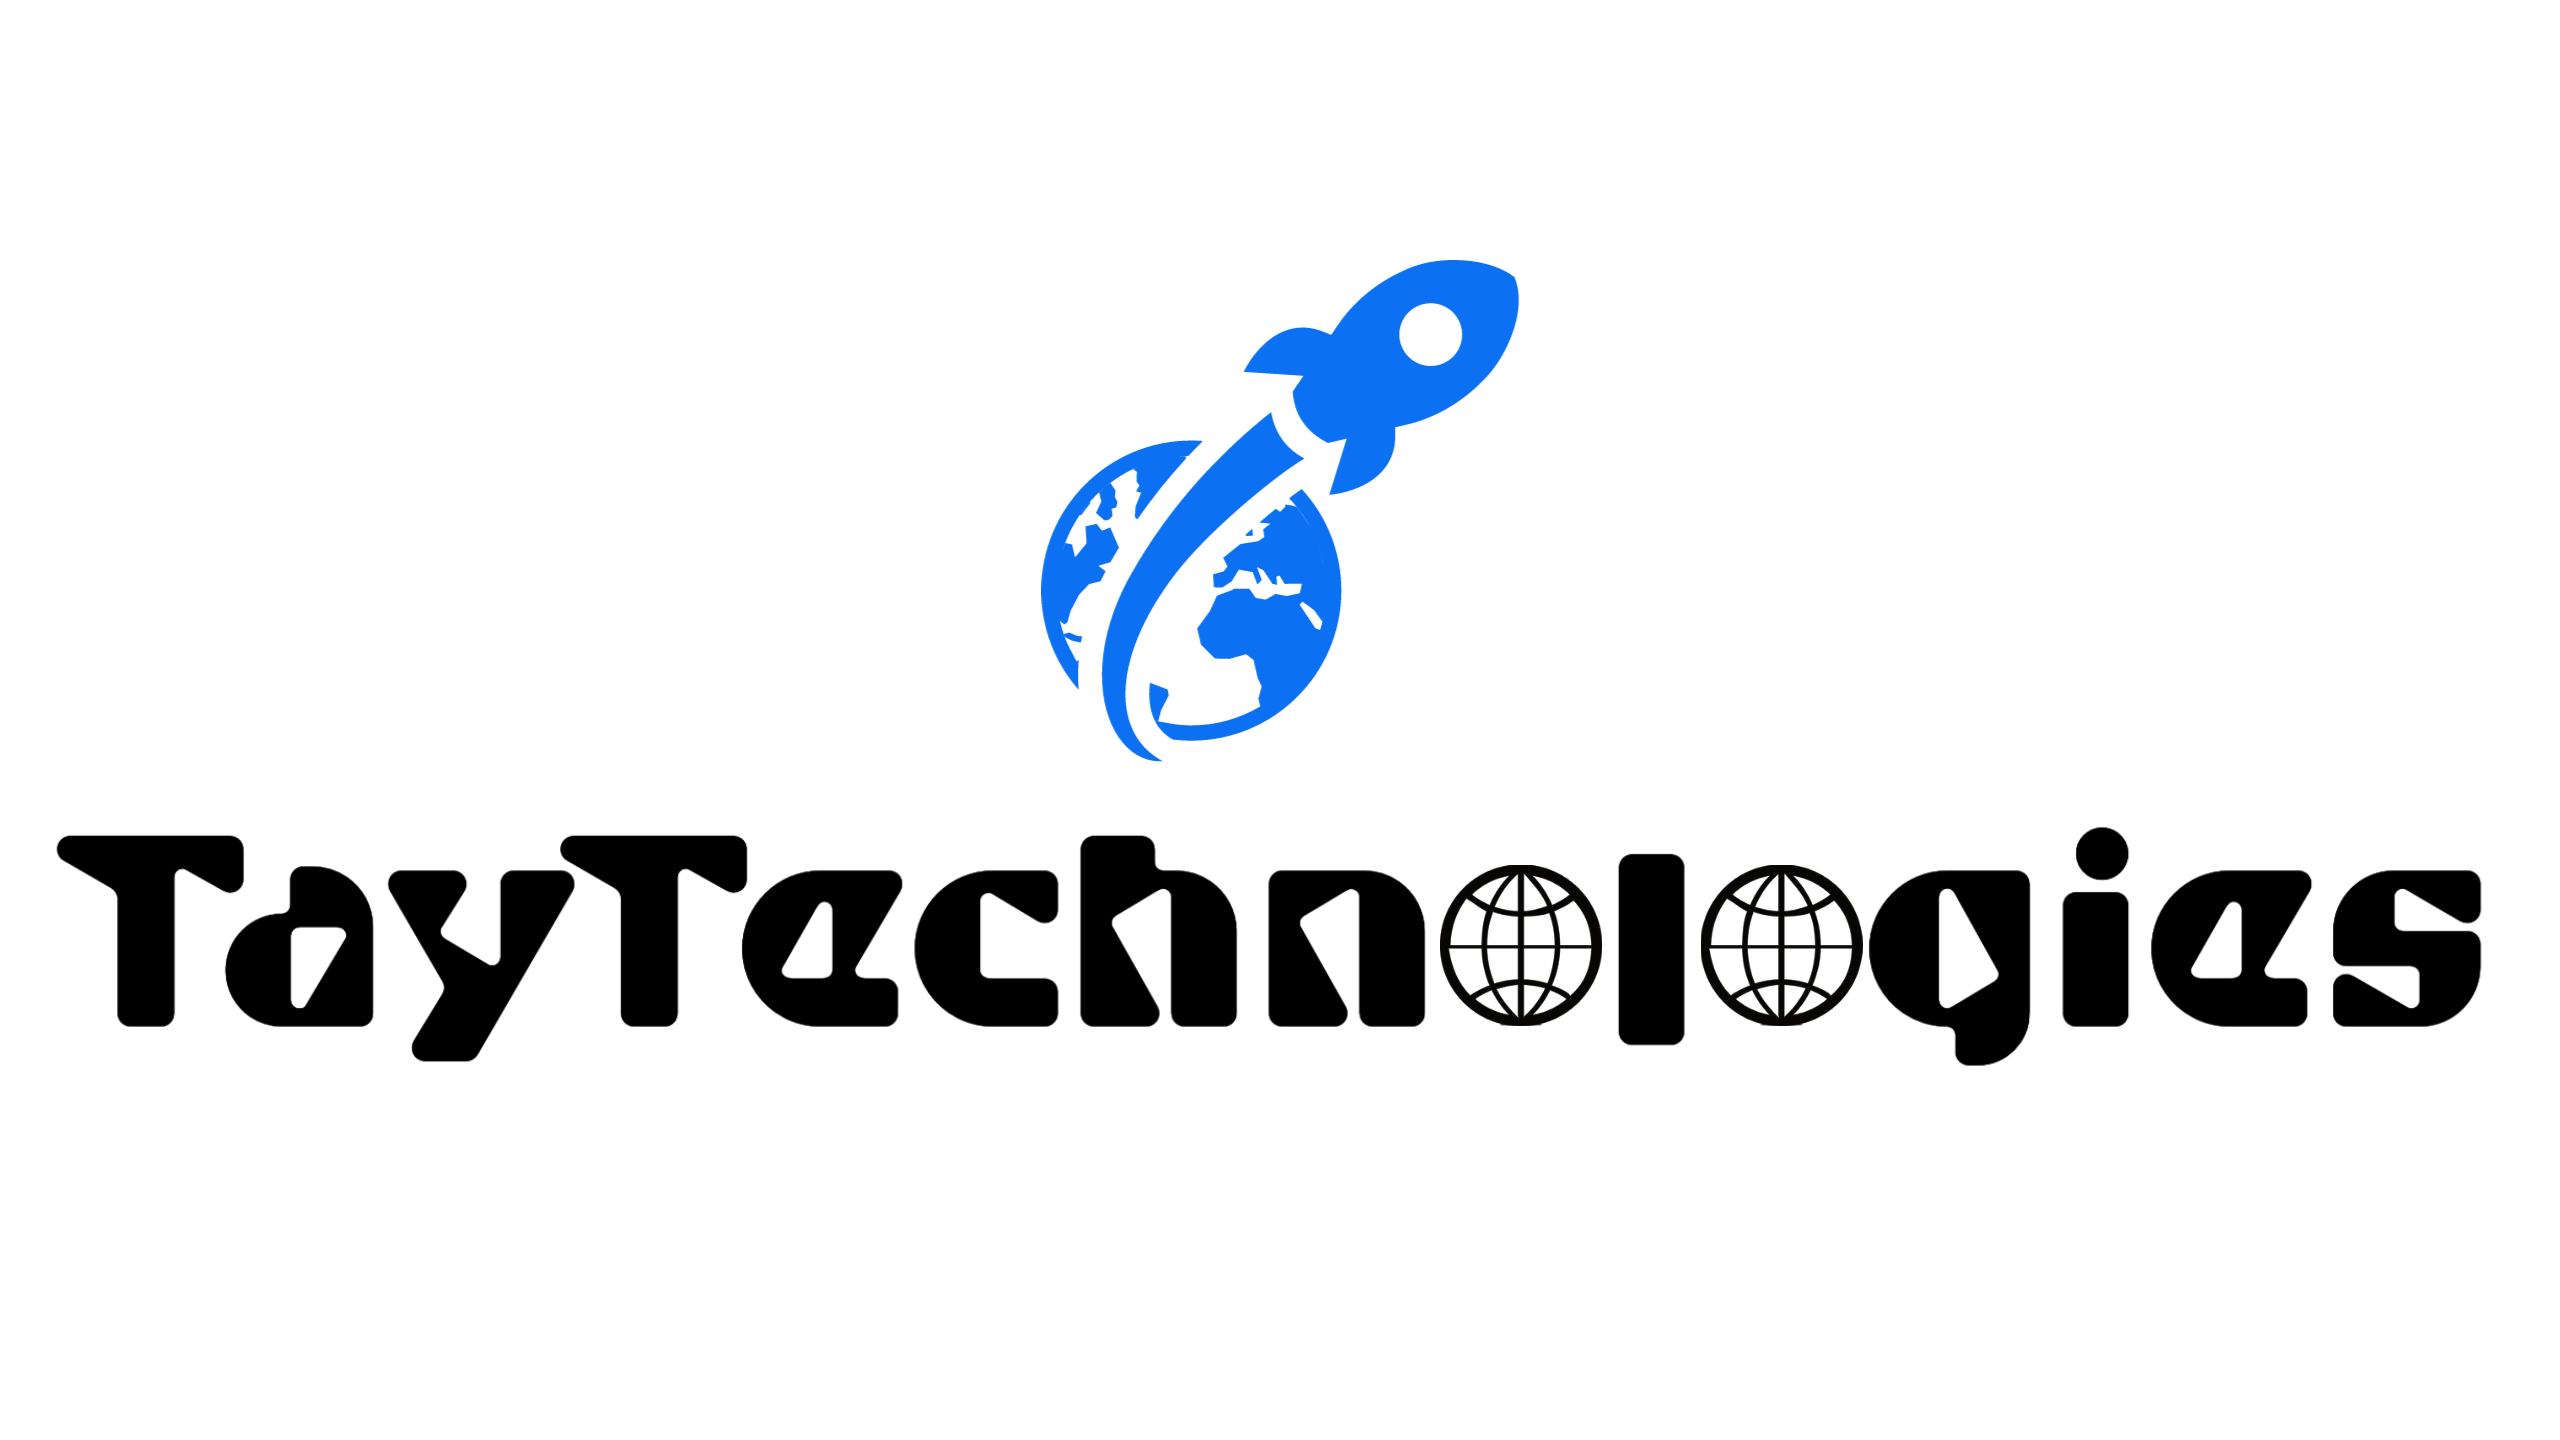 TayTechnologies help create technology solutions impacting millions